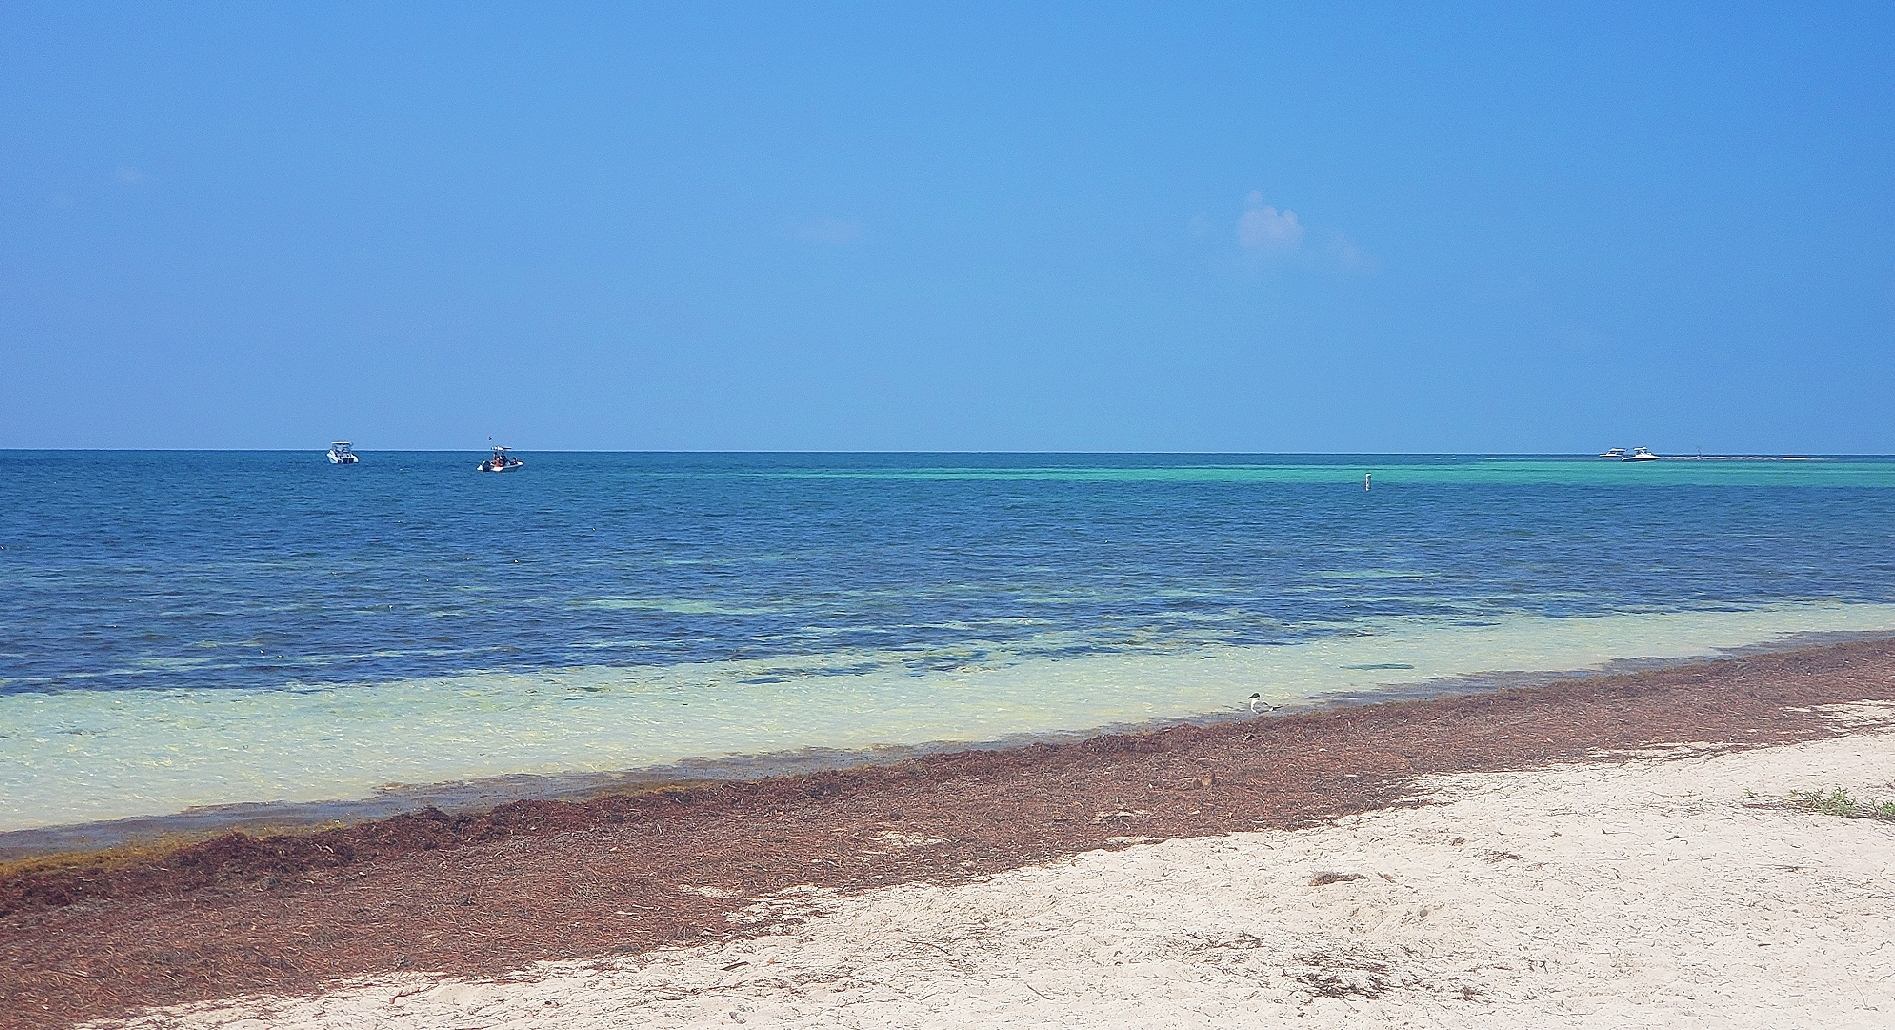 The picture shows the Florida Keys ocean on a sunny day, light teal colored water with bright blue skies 